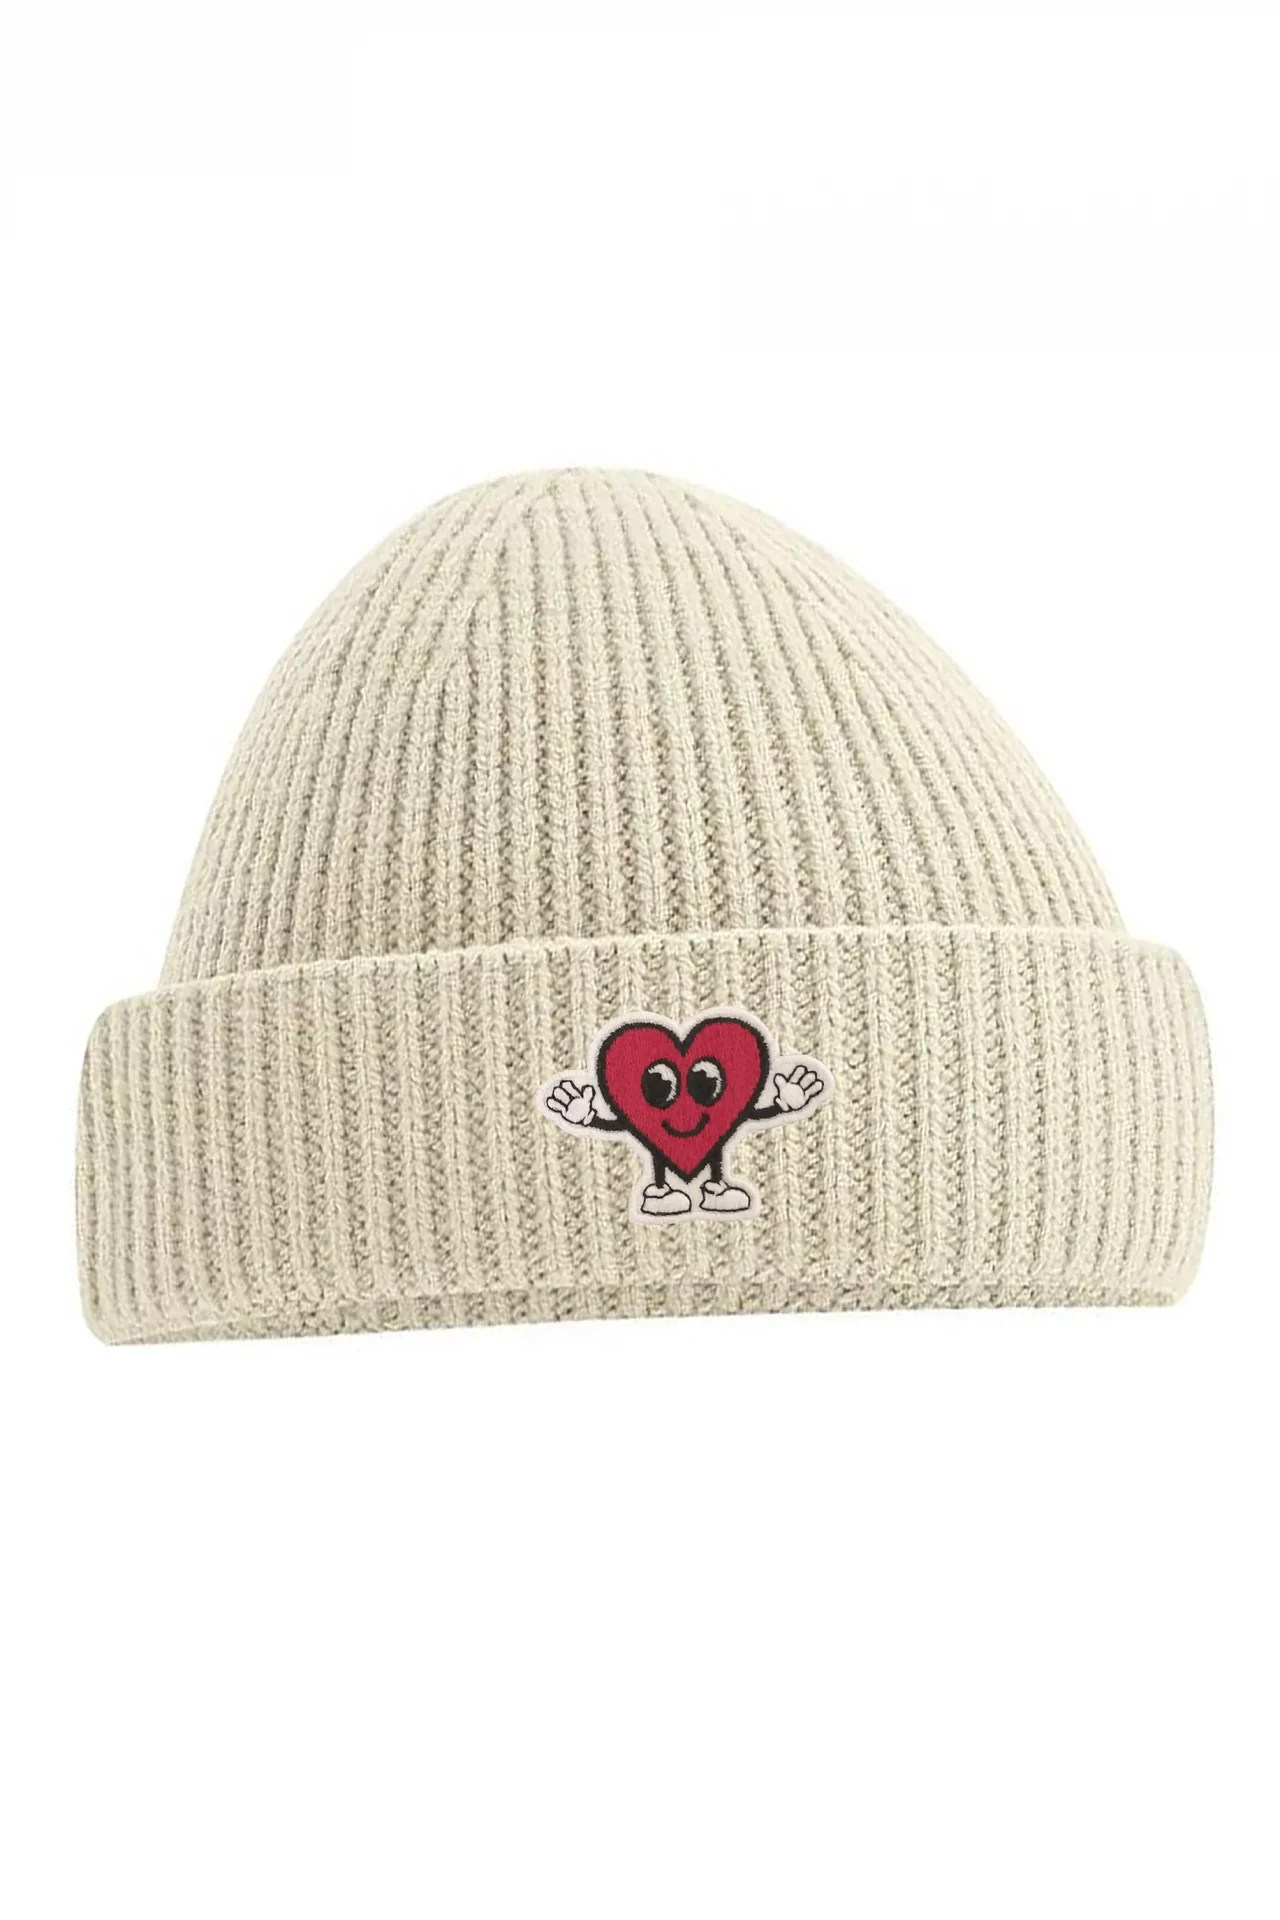 Red beanie with a heart illustration embroided